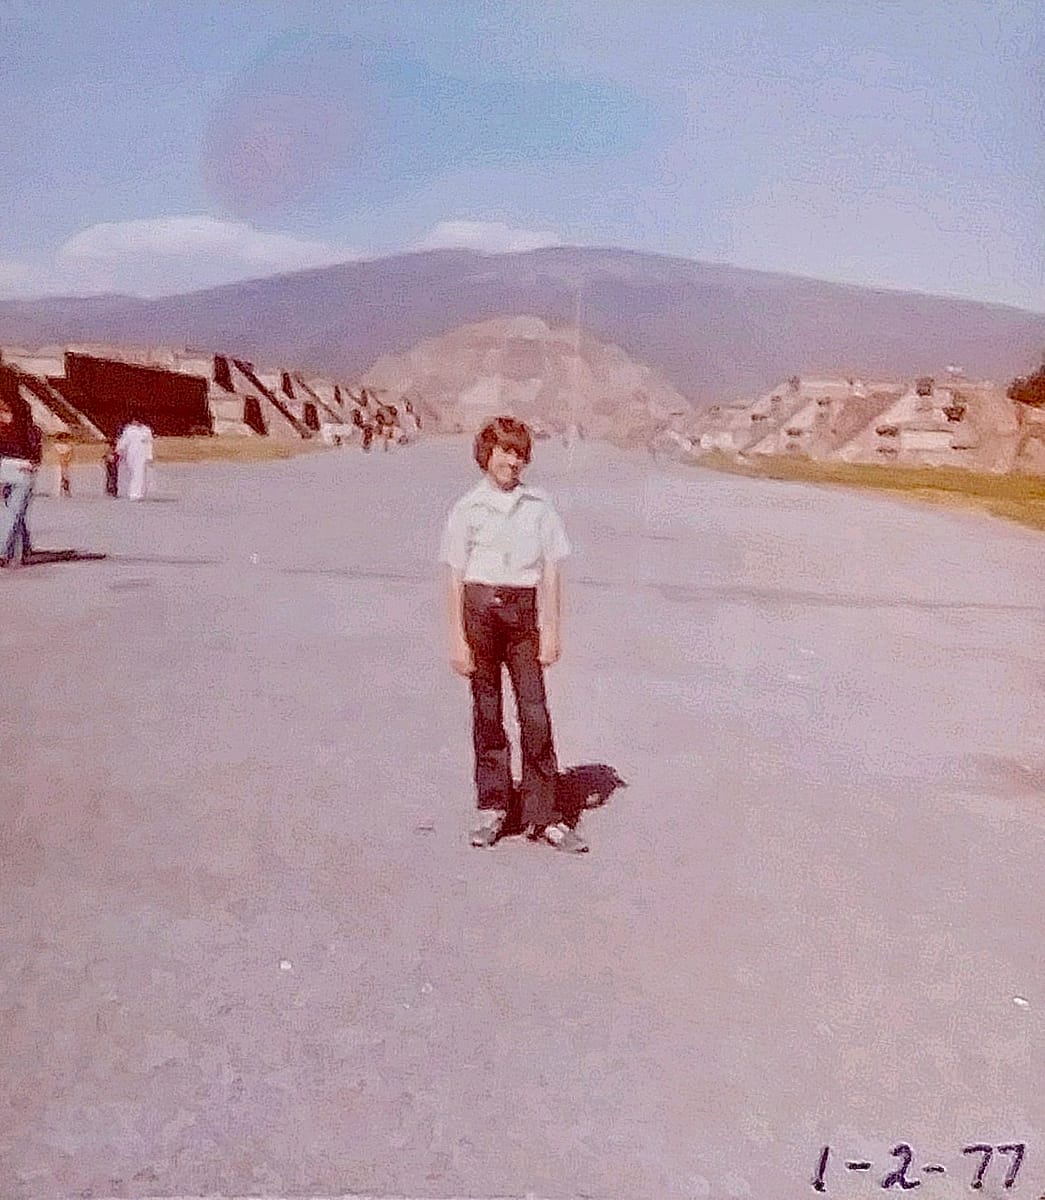 Here I am at 11 years old standing in front of one of the pyramids near Mexico City